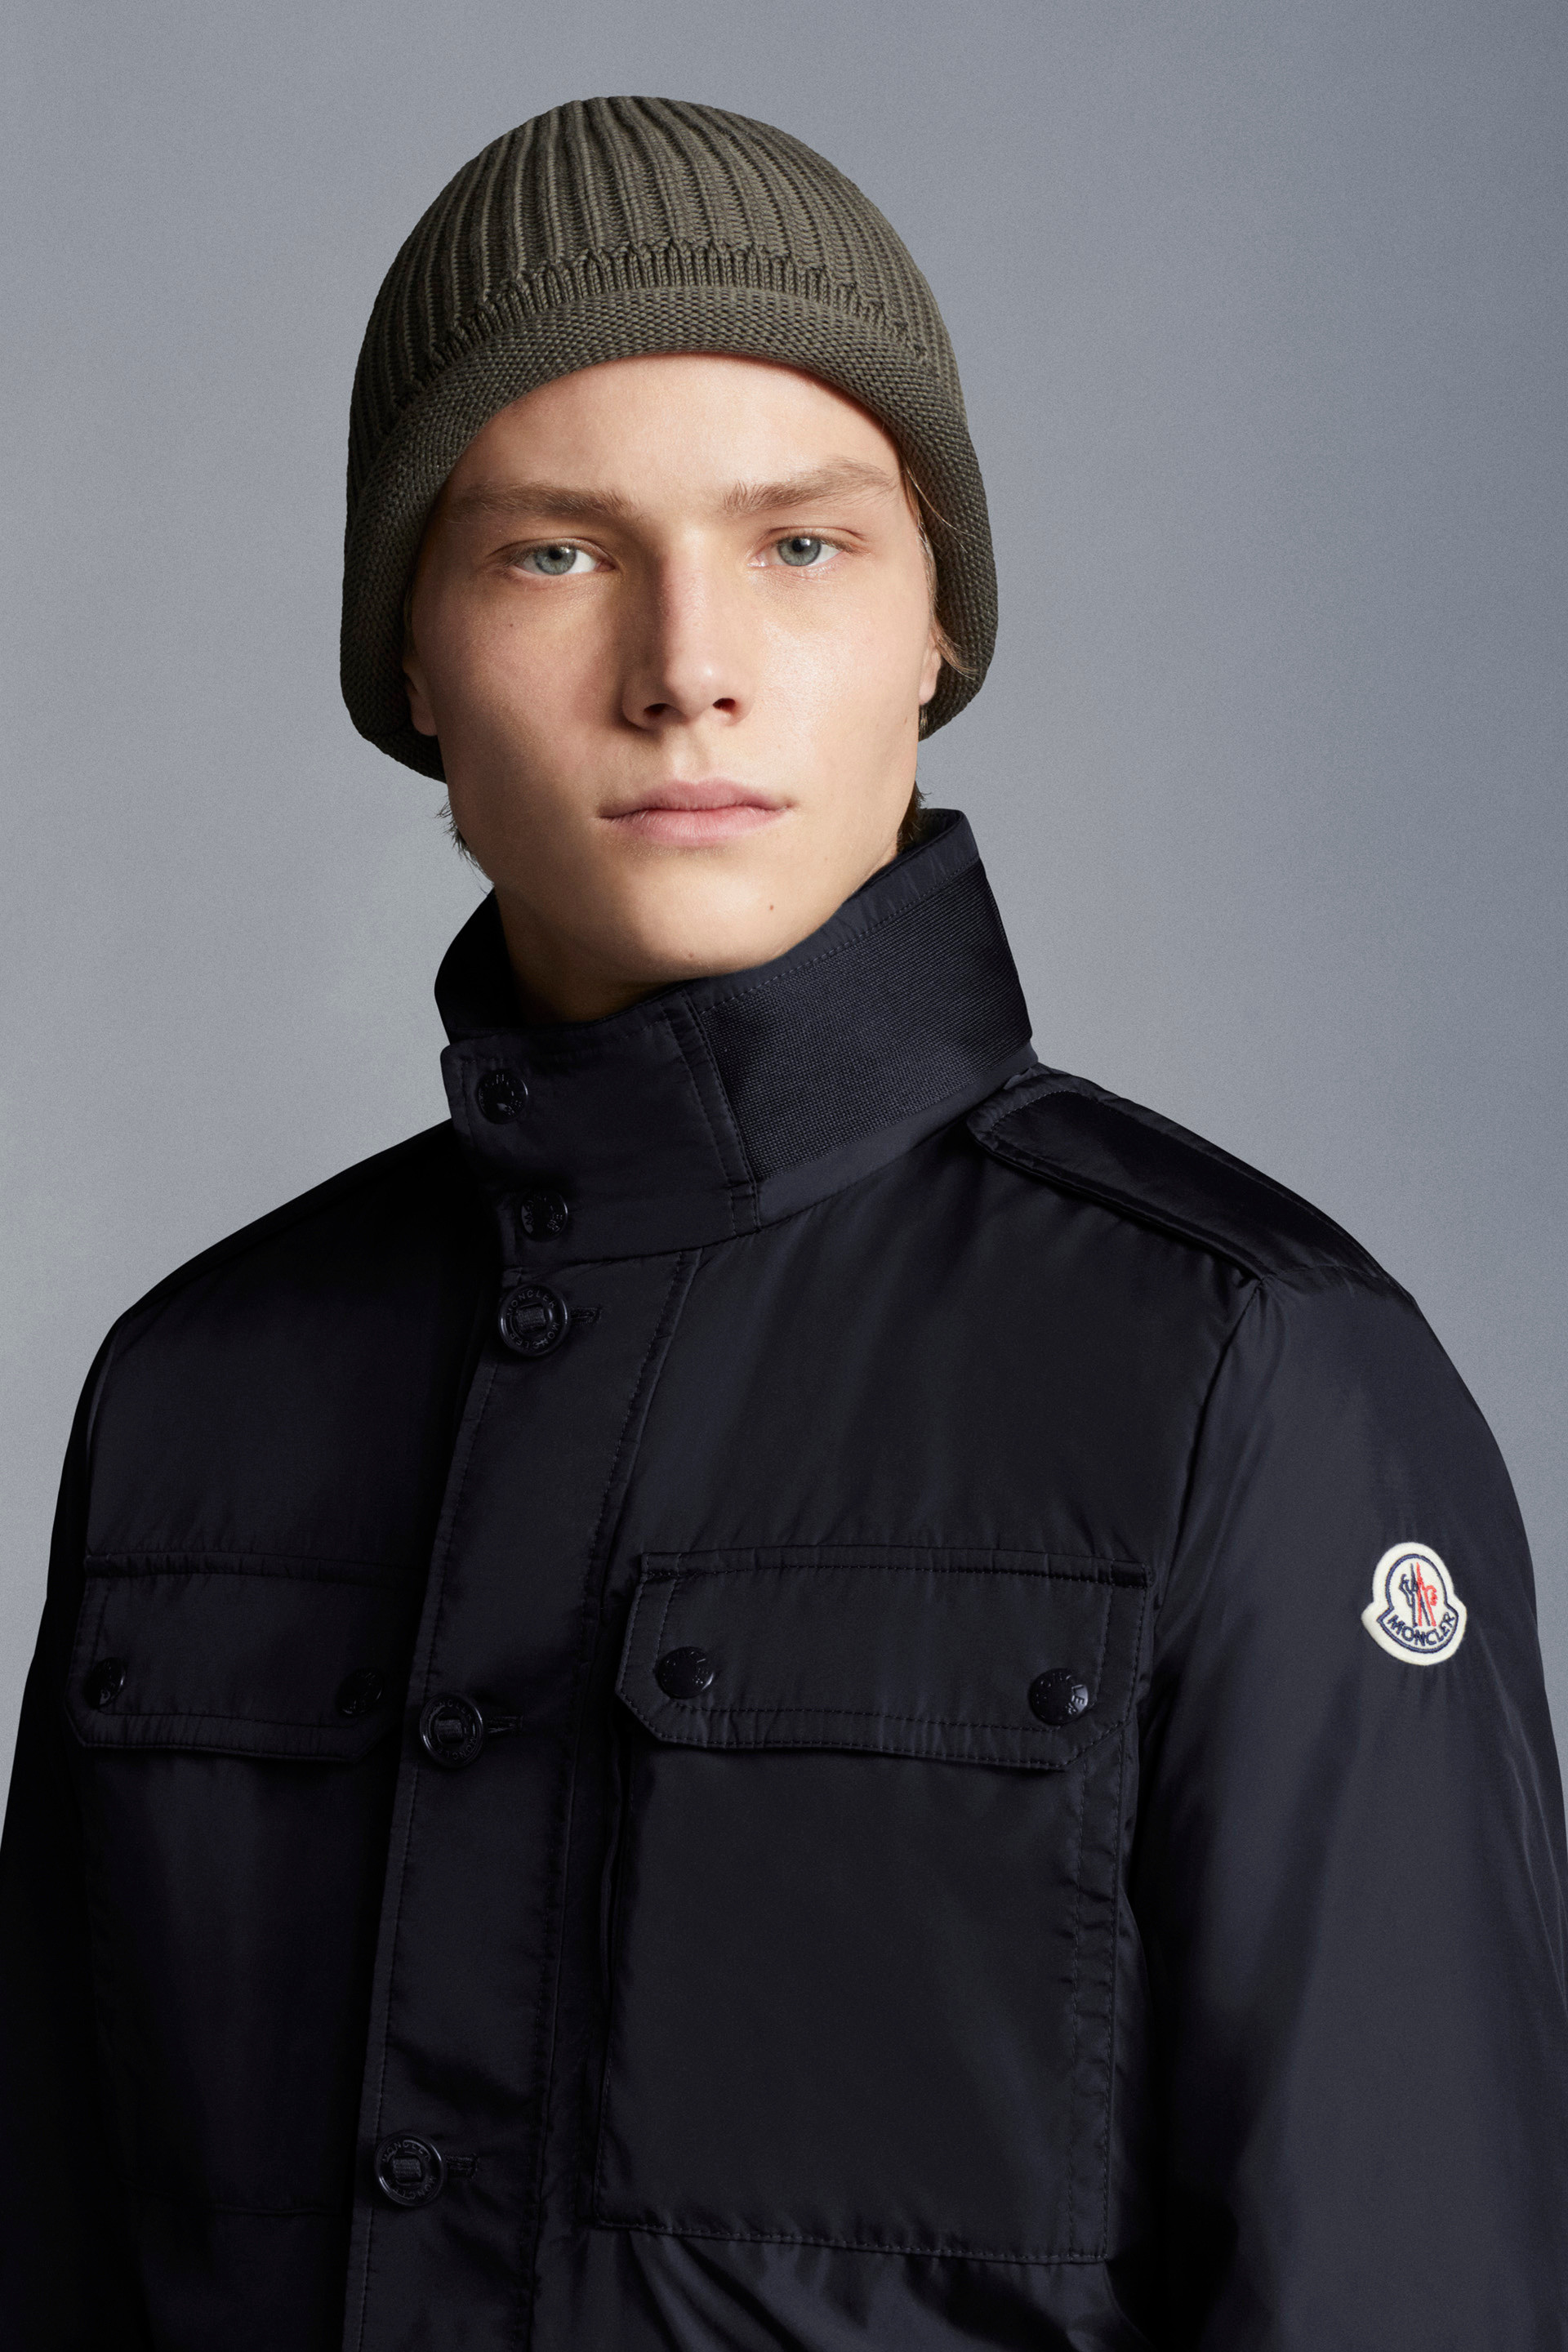 Jackets for Men - Blazers, Down & Bombers Jackets | Moncler US